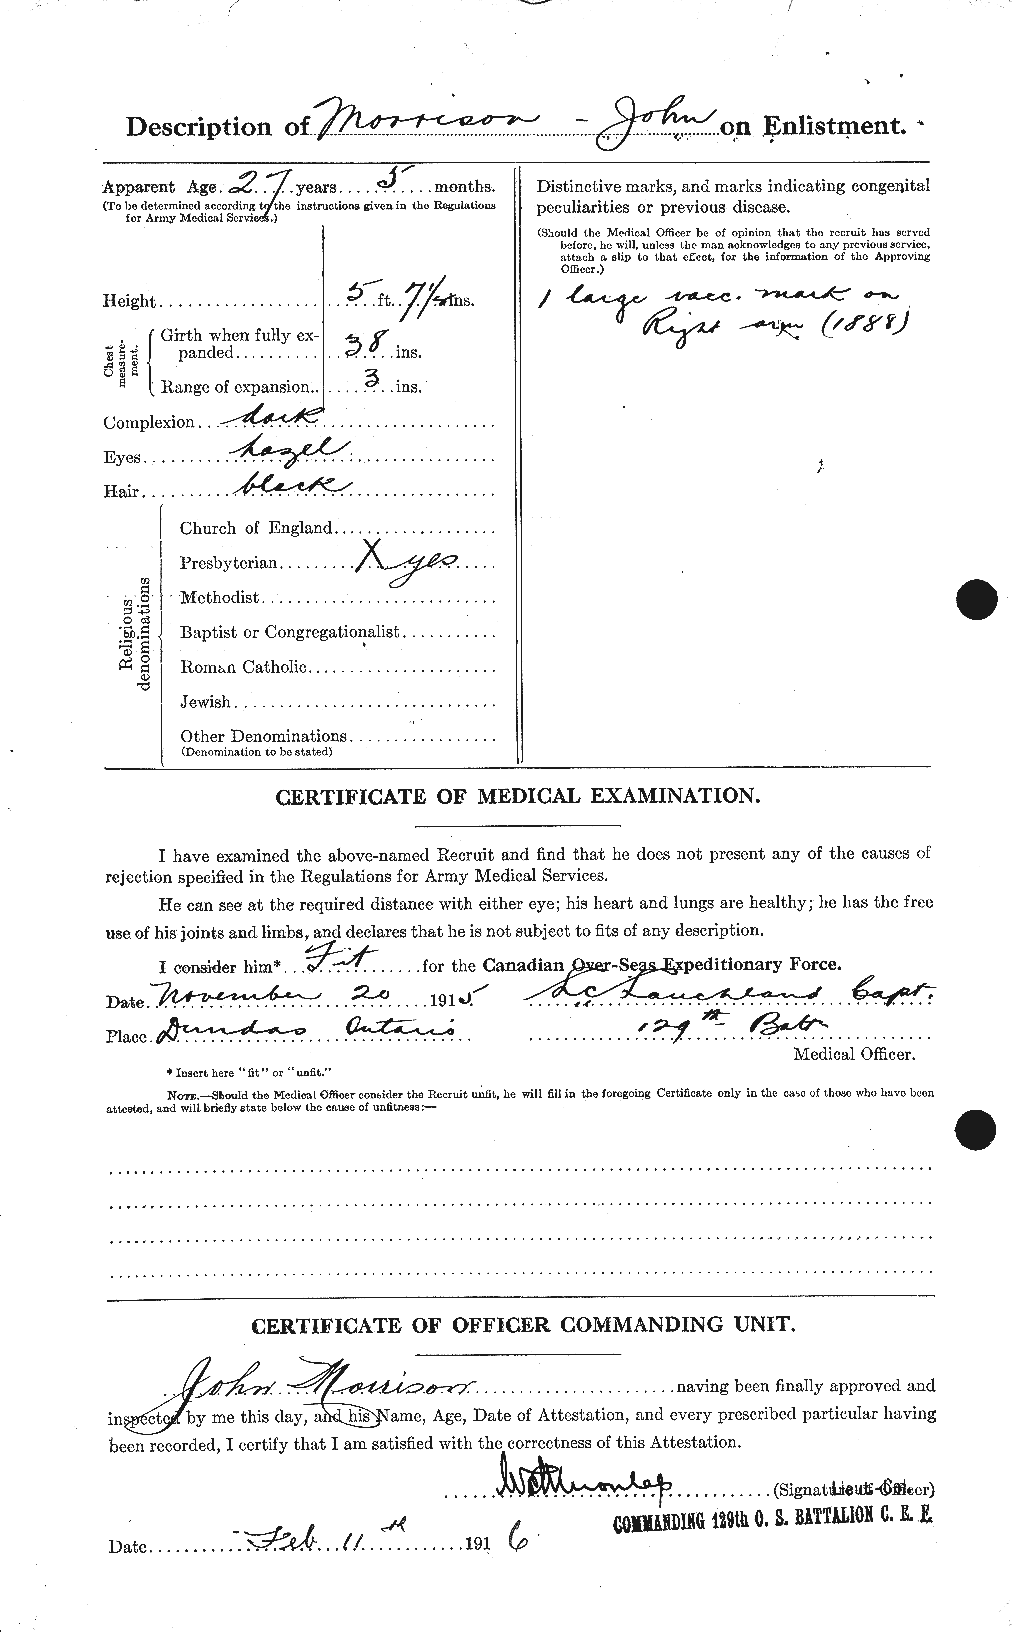 Personnel Records of the First World War - CEF 506989b